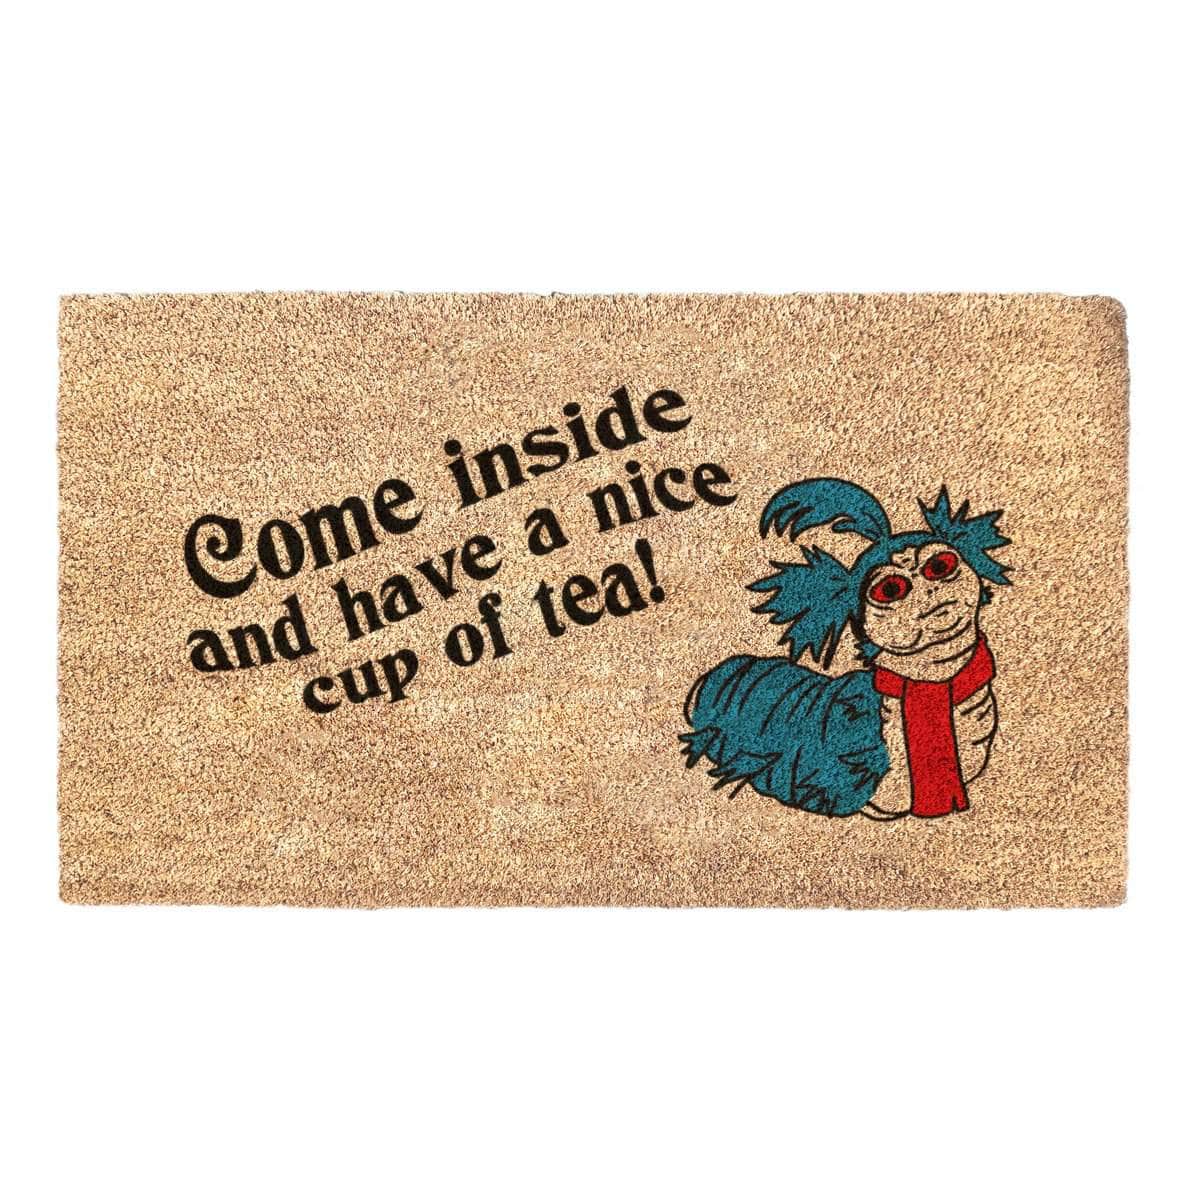 Labyrinth Film Worm Cup of Tea Quote Doormat - Fandom Funny Gift